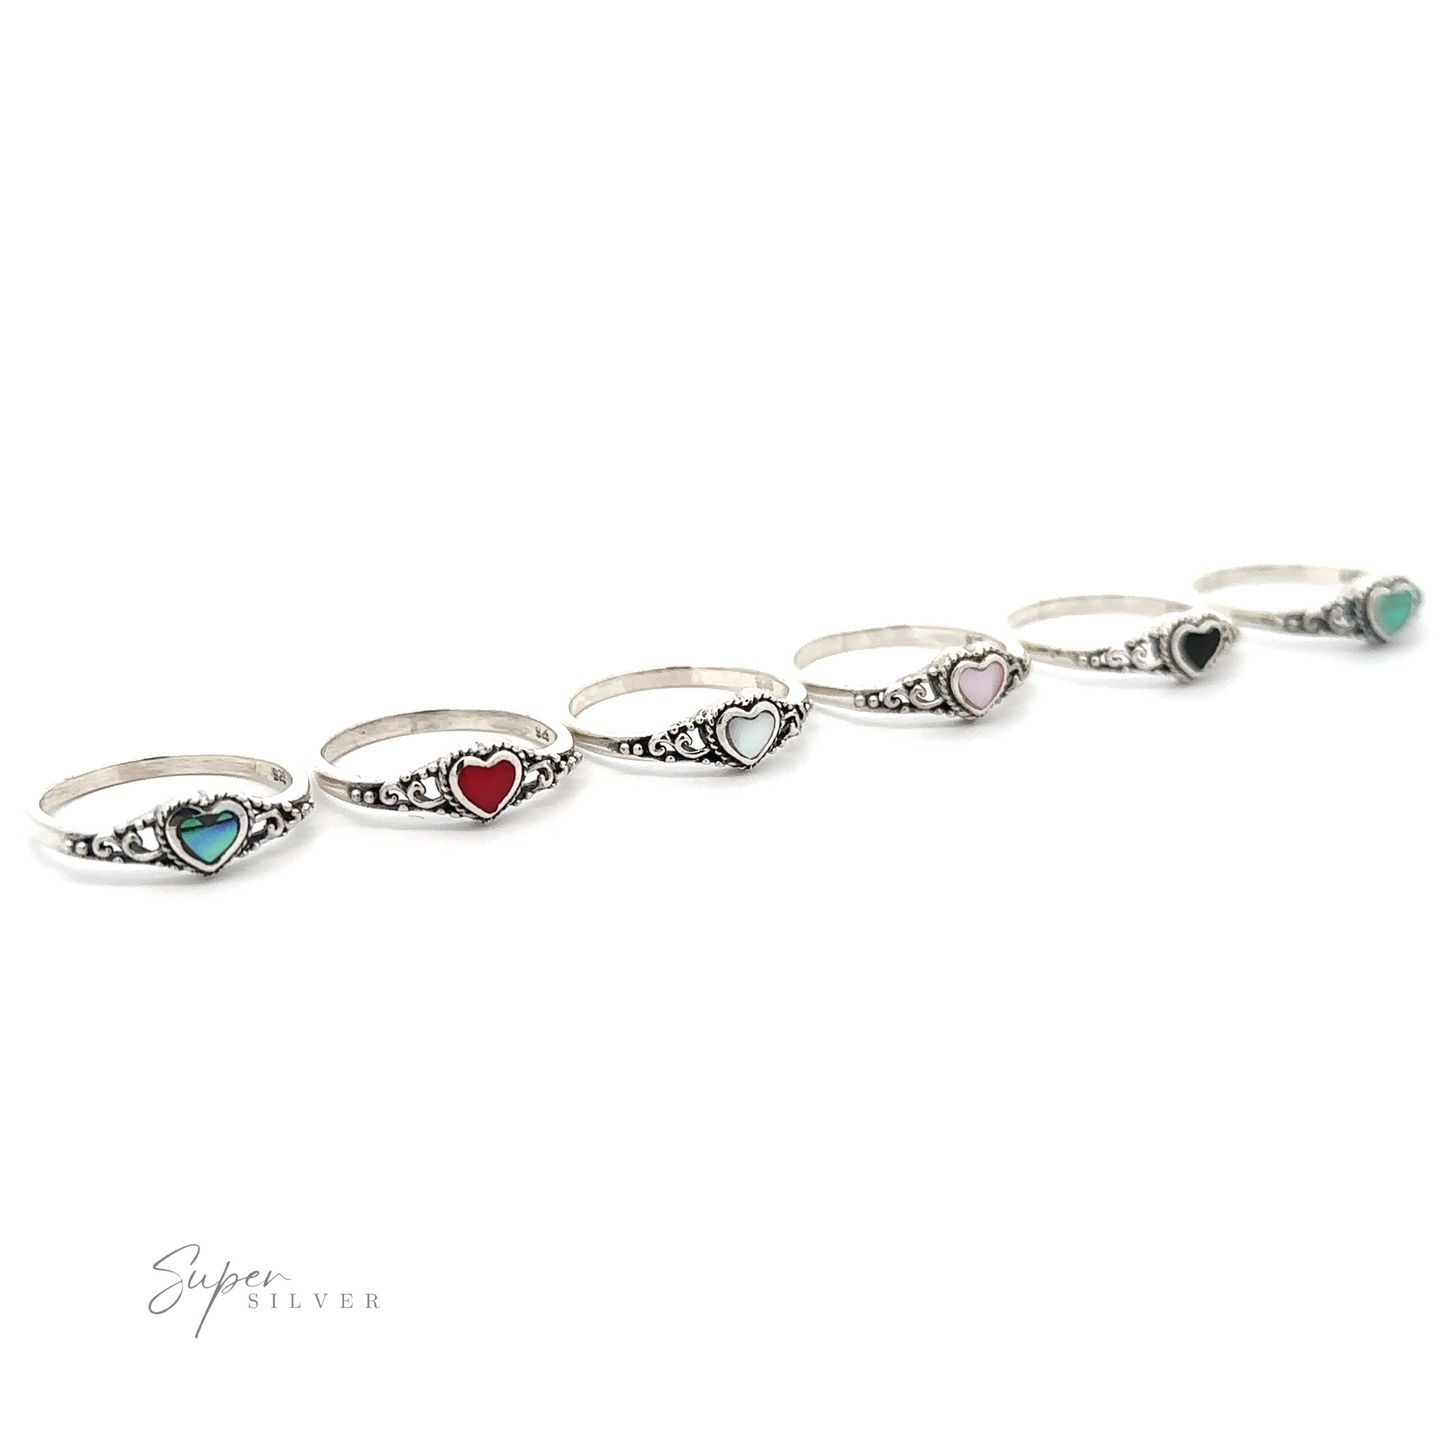 A row of sterling silver rings with different colored stones, including a Dainty Heart Filigree Ring with Inlaid Stones.